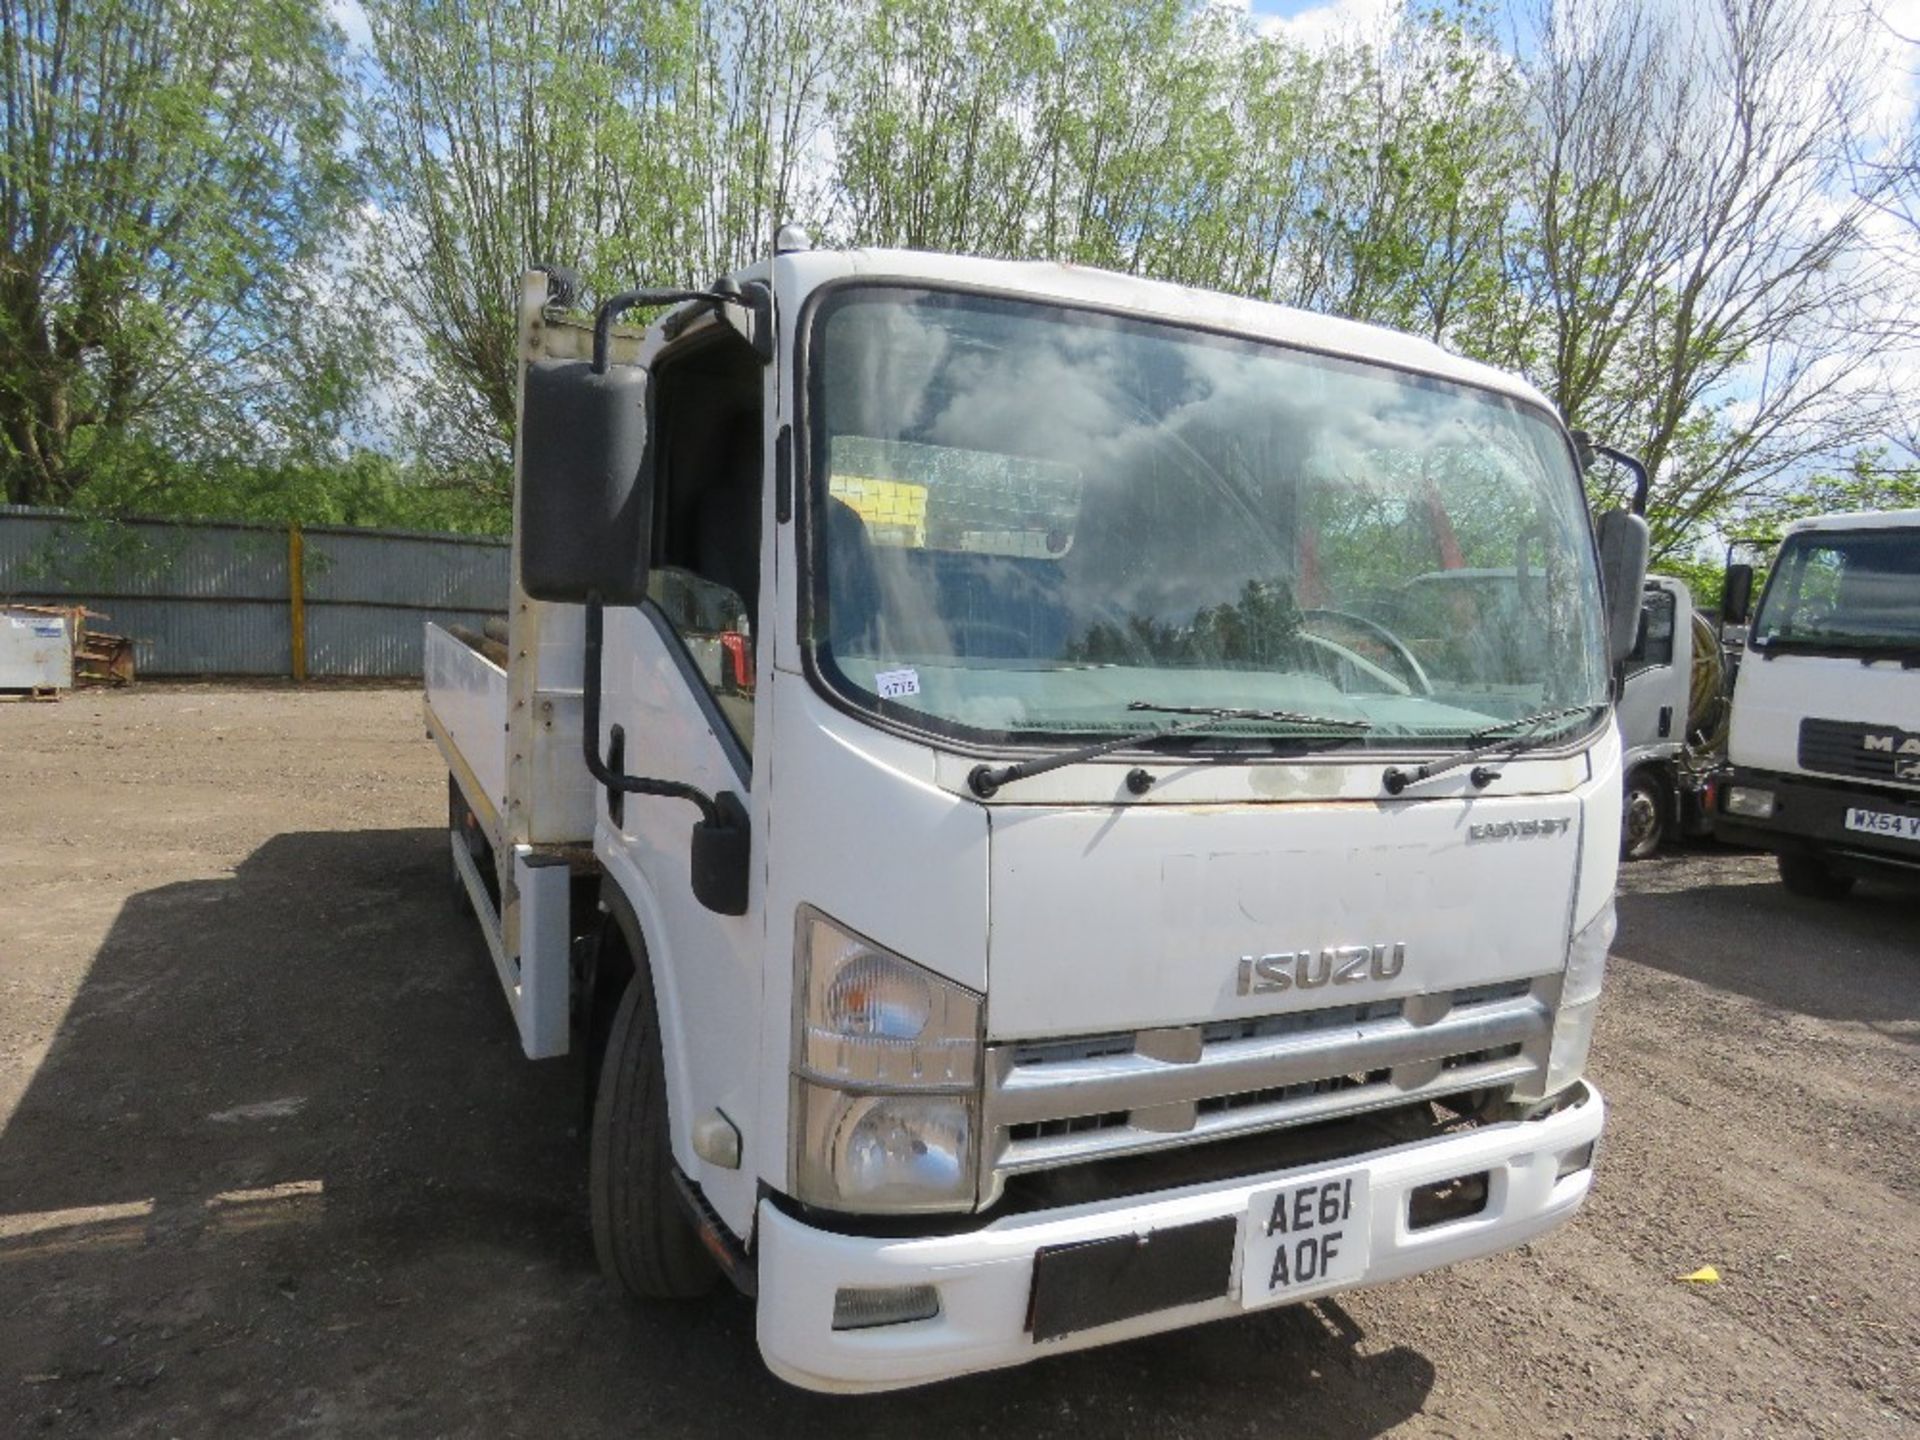 ISUZU CONCRETE PUMPING LORRY REG:AE61 AOF. EASYSHIFT GEARBOX. WITH V5. INCLUDES PIPES, CONNECTORS AN - Image 12 of 12